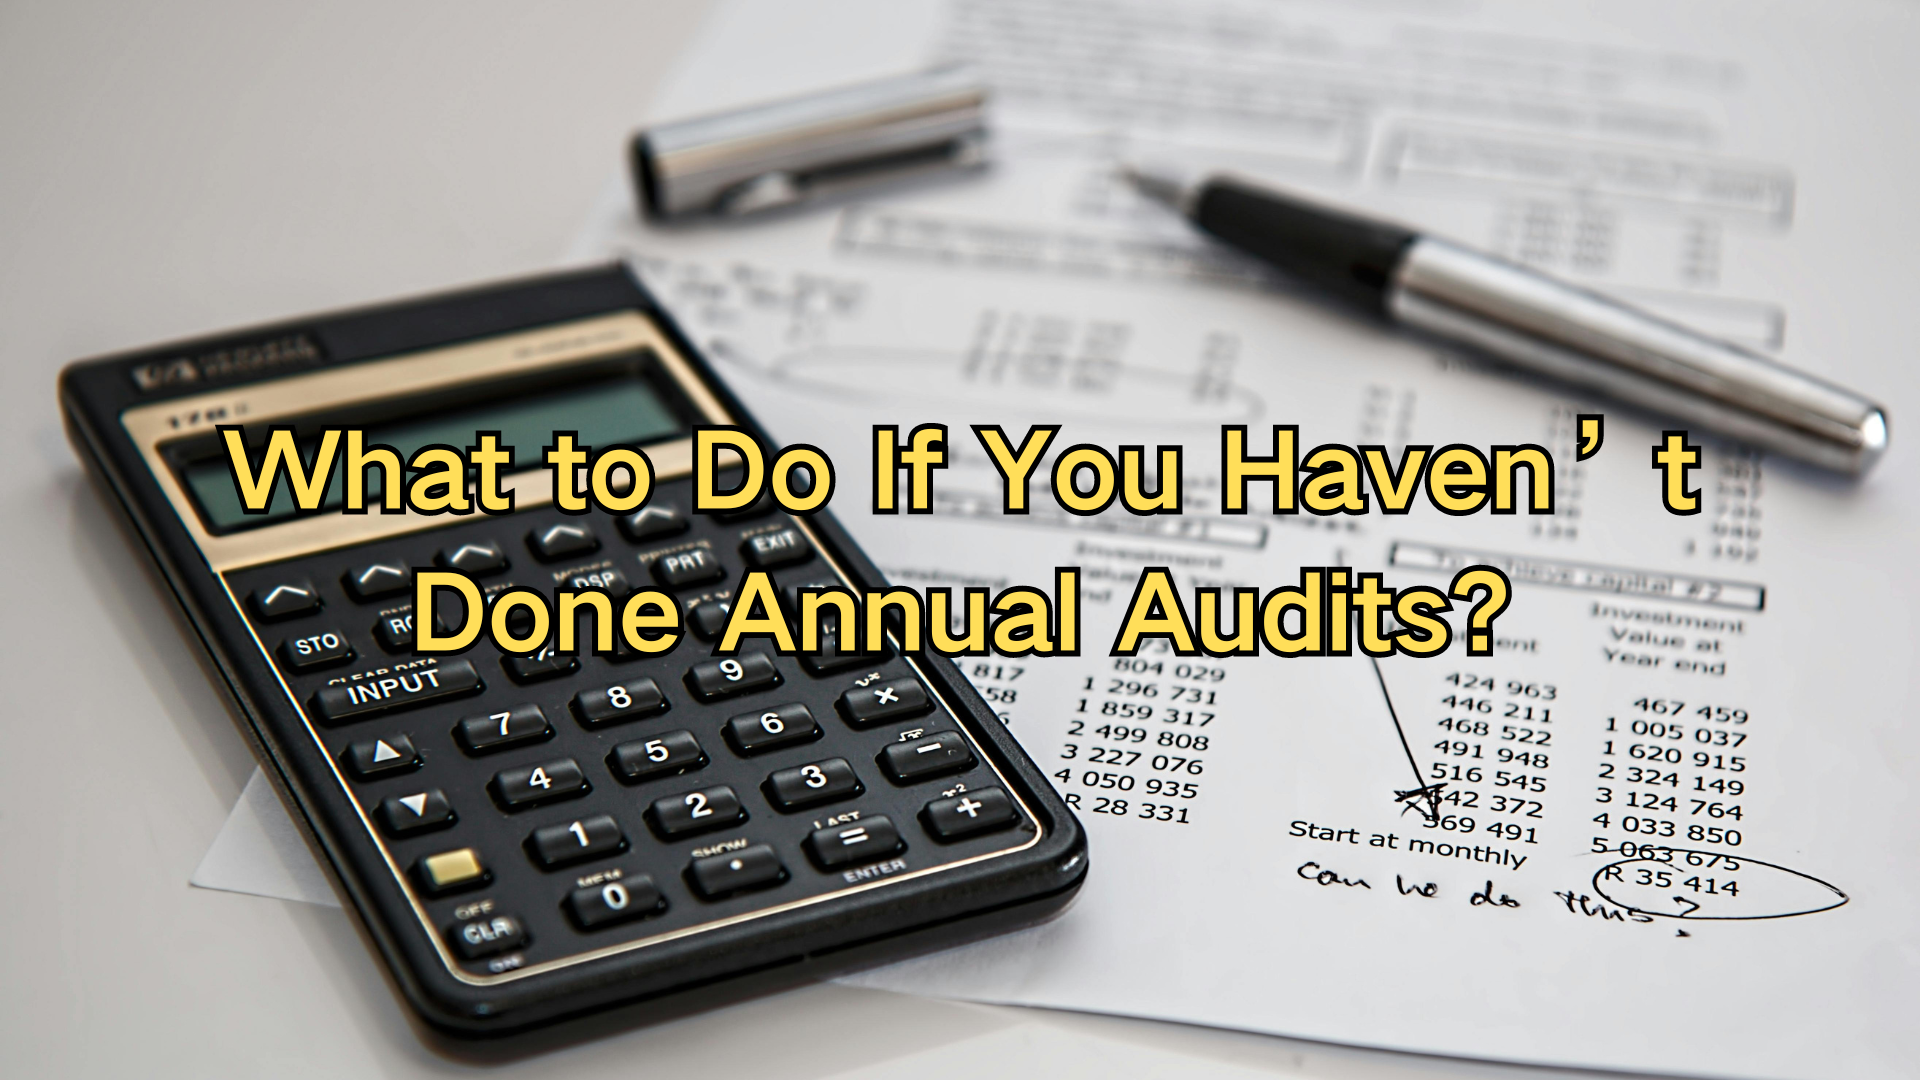 Haven’t Done Annual Audits